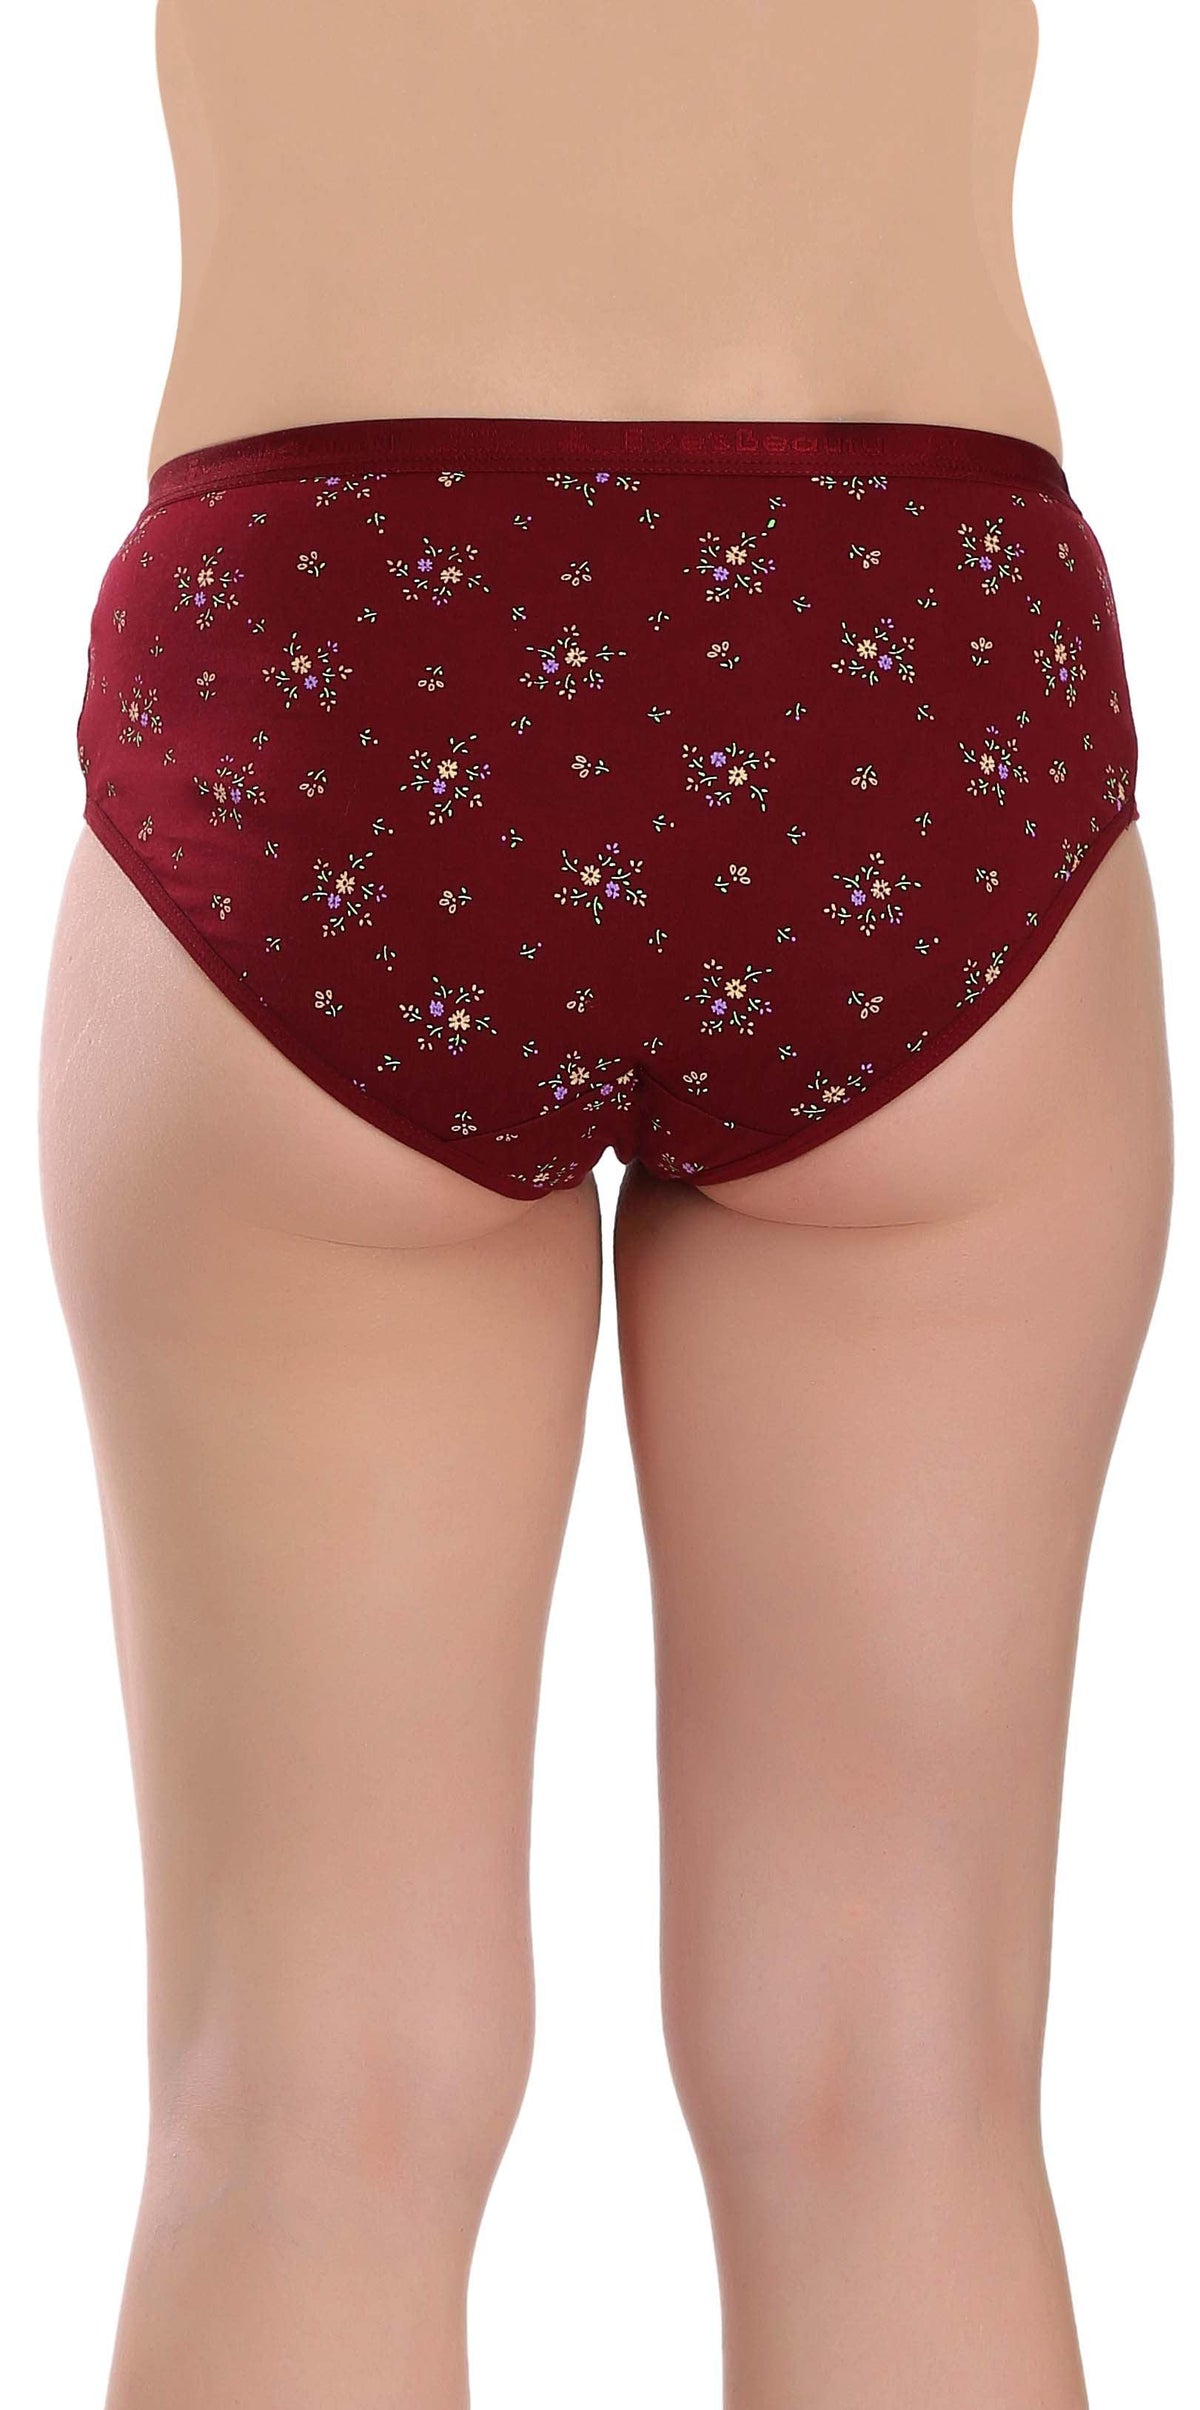 MAROON Multicolor Cotton Blend High Rise Pack of 3 Women's Hipster